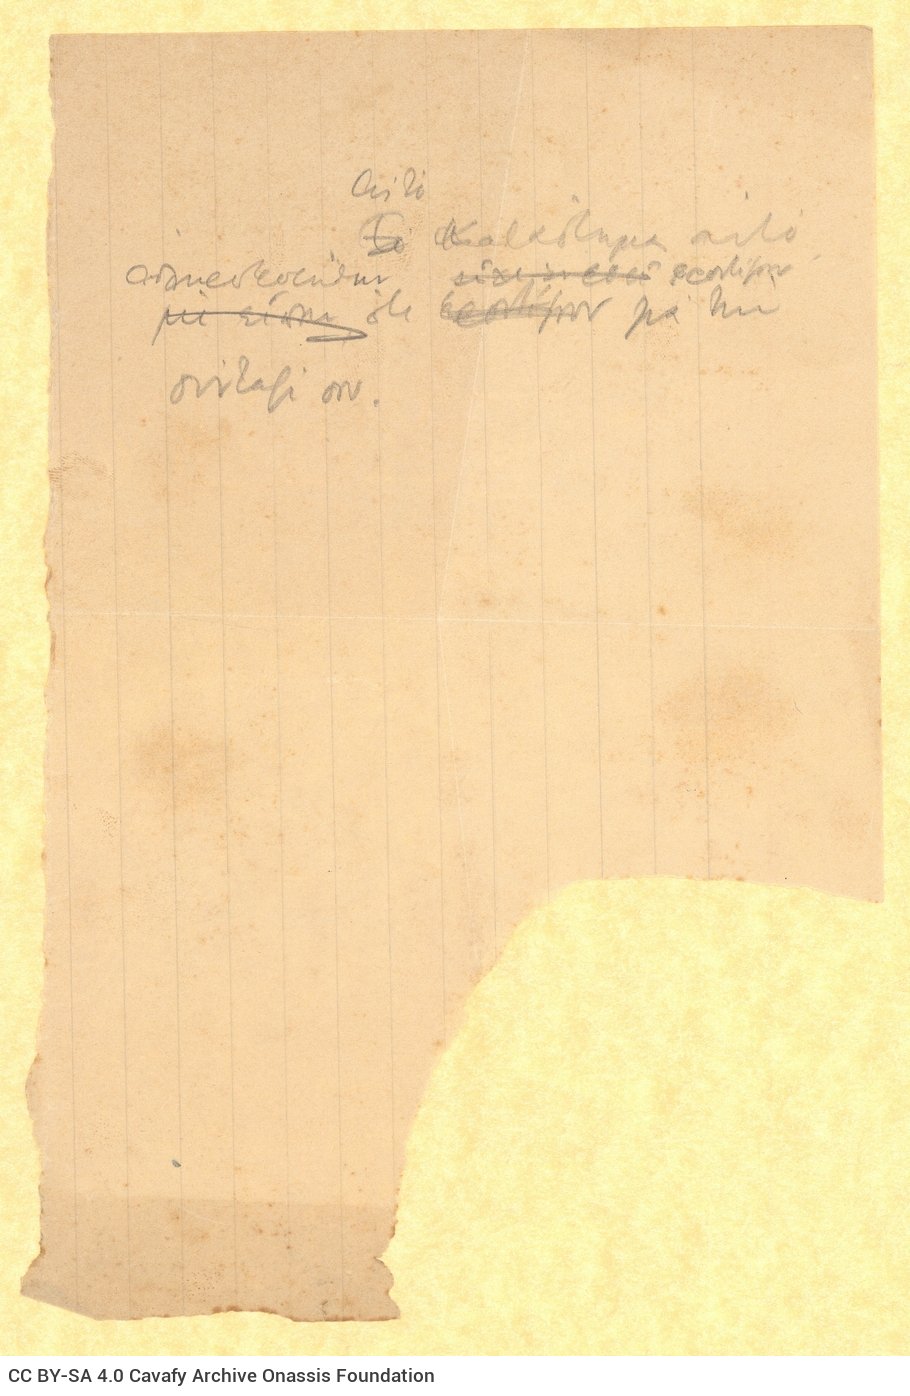 Handwritten note on a piece of paper regarding the pension of Paul Cavafy.